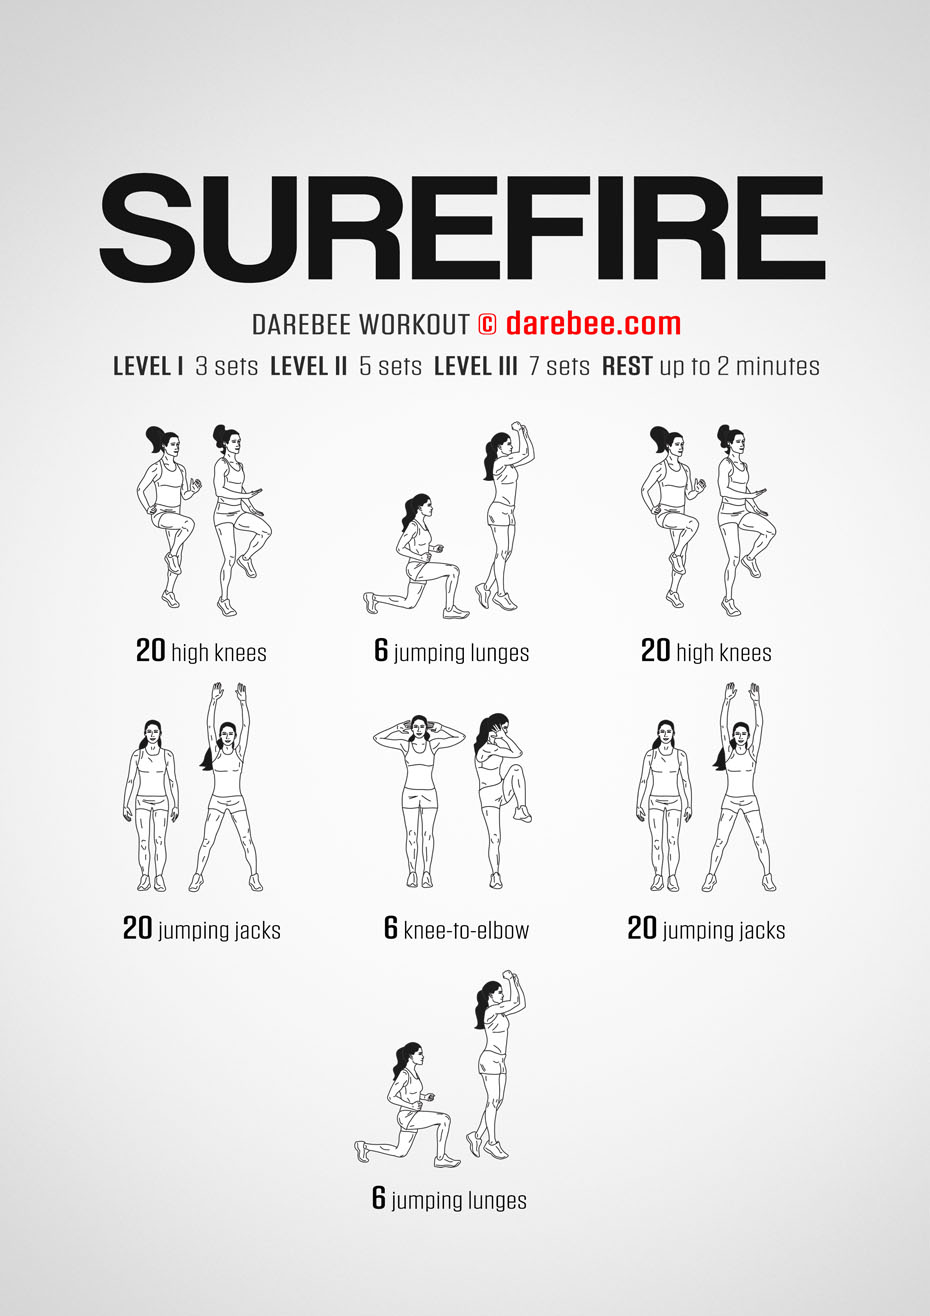 Surefire is a lower body high-burn Darebee home-fitness workout that will make your heart pump harder and your lungs work more.